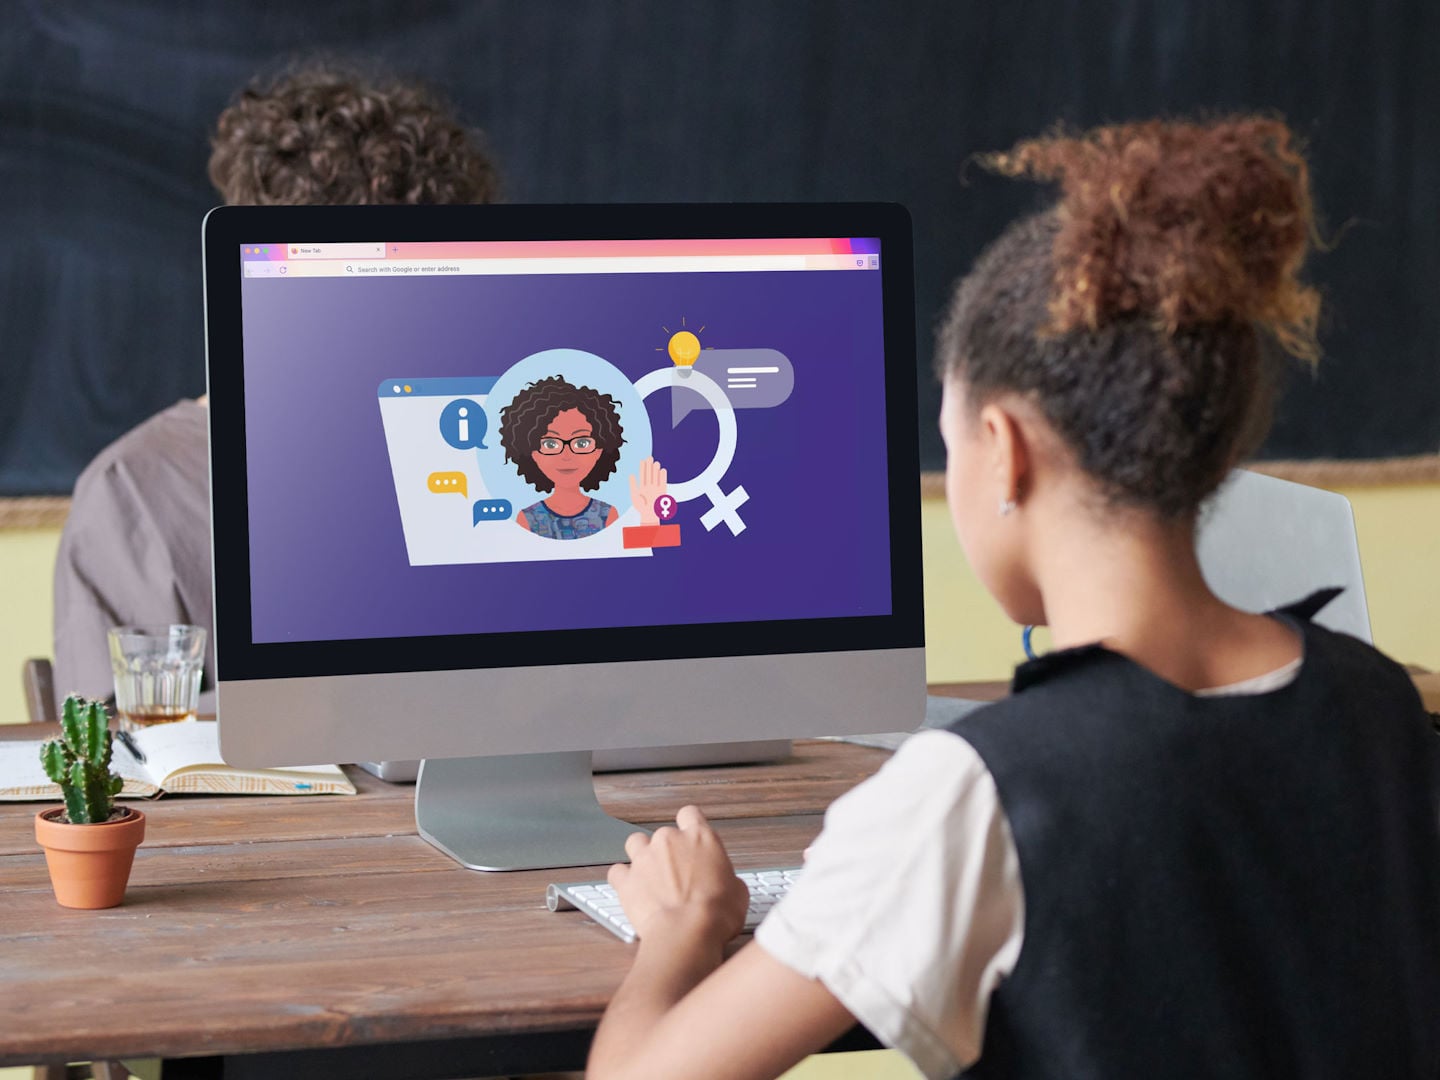 A girl is in front of a computer screen displaying the avatar of another woman inviting her to a discussion.